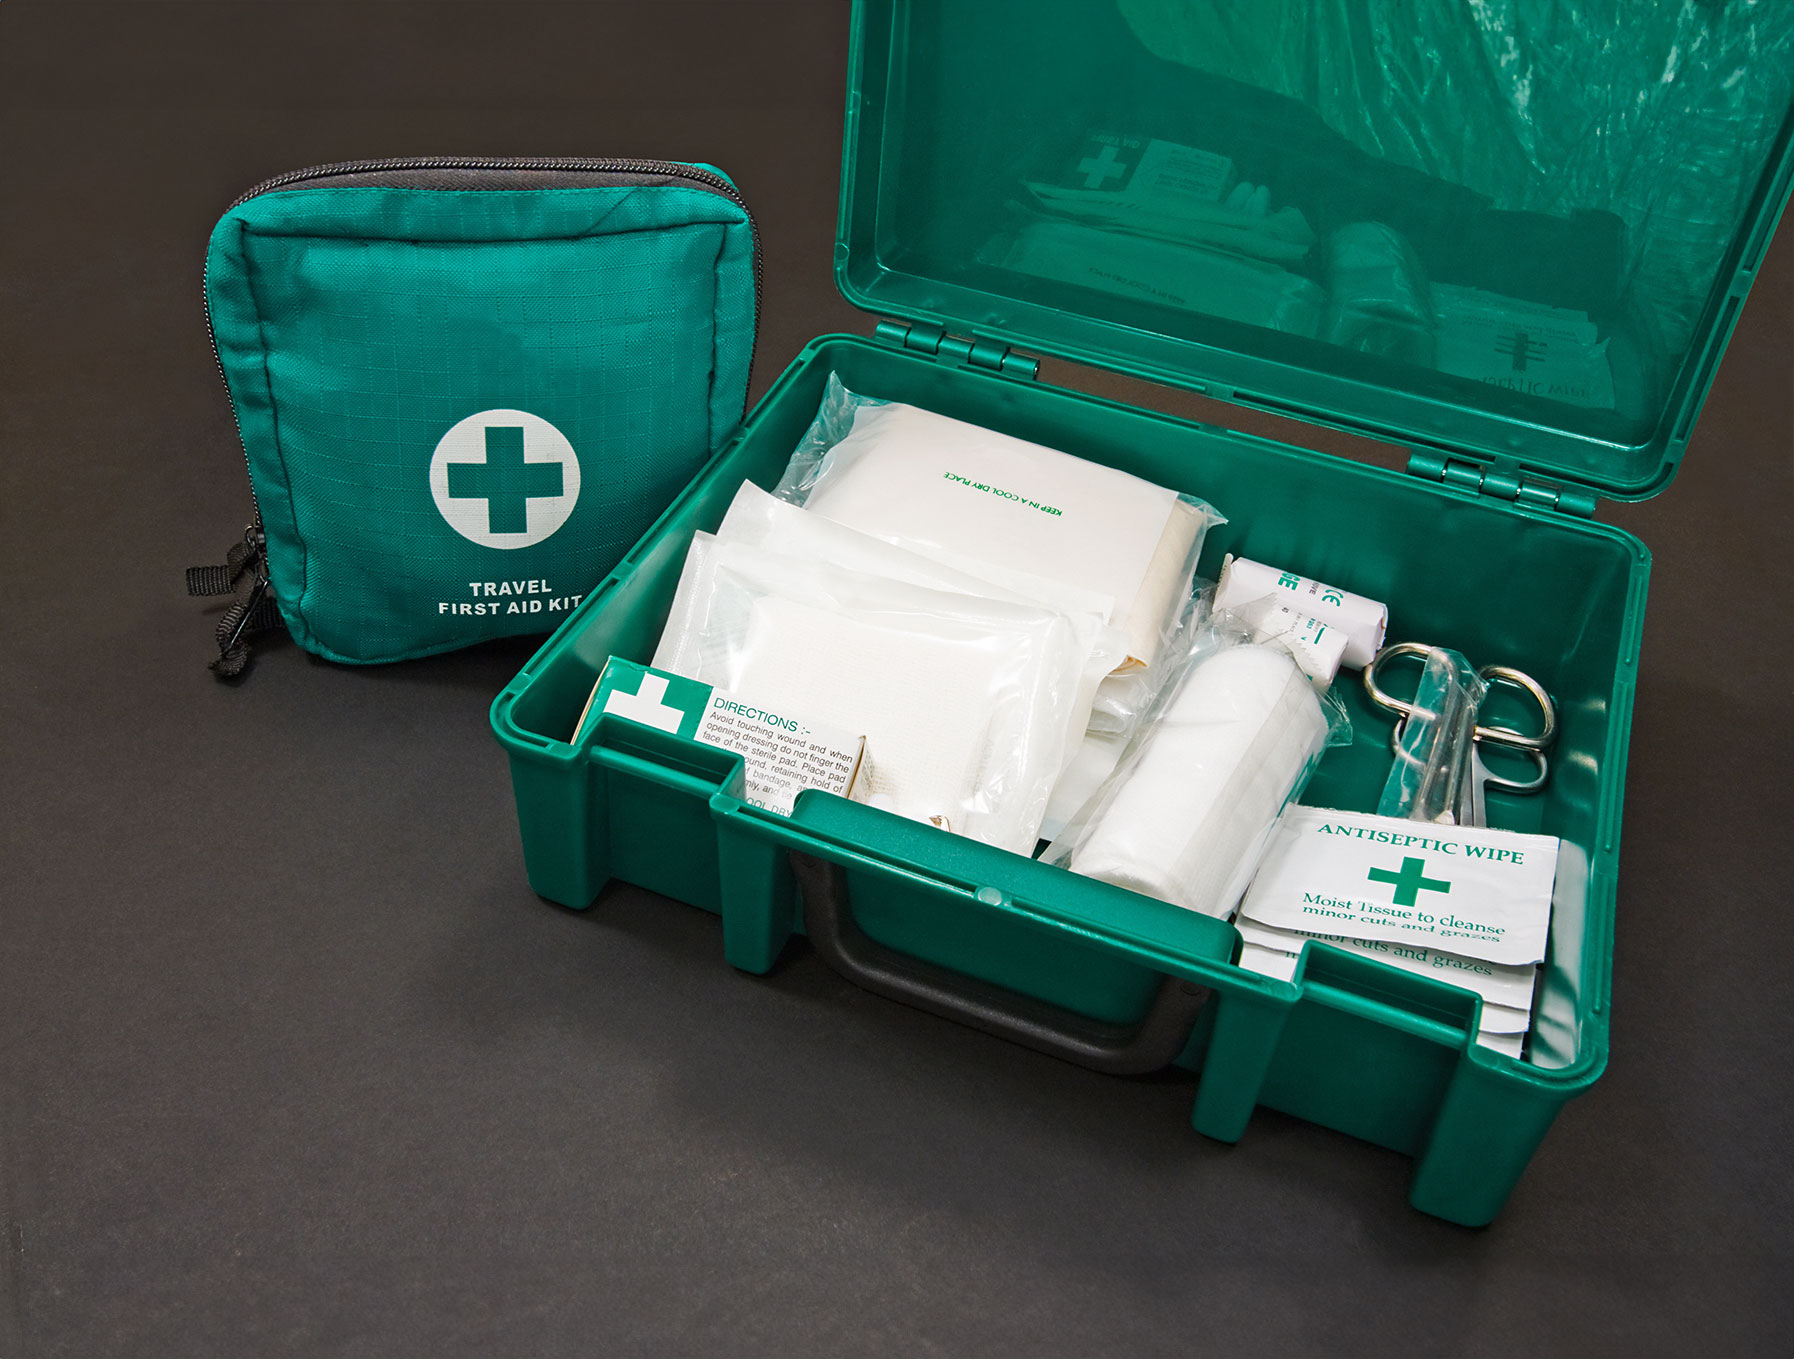 Exploring Howsafe's First Aid Range